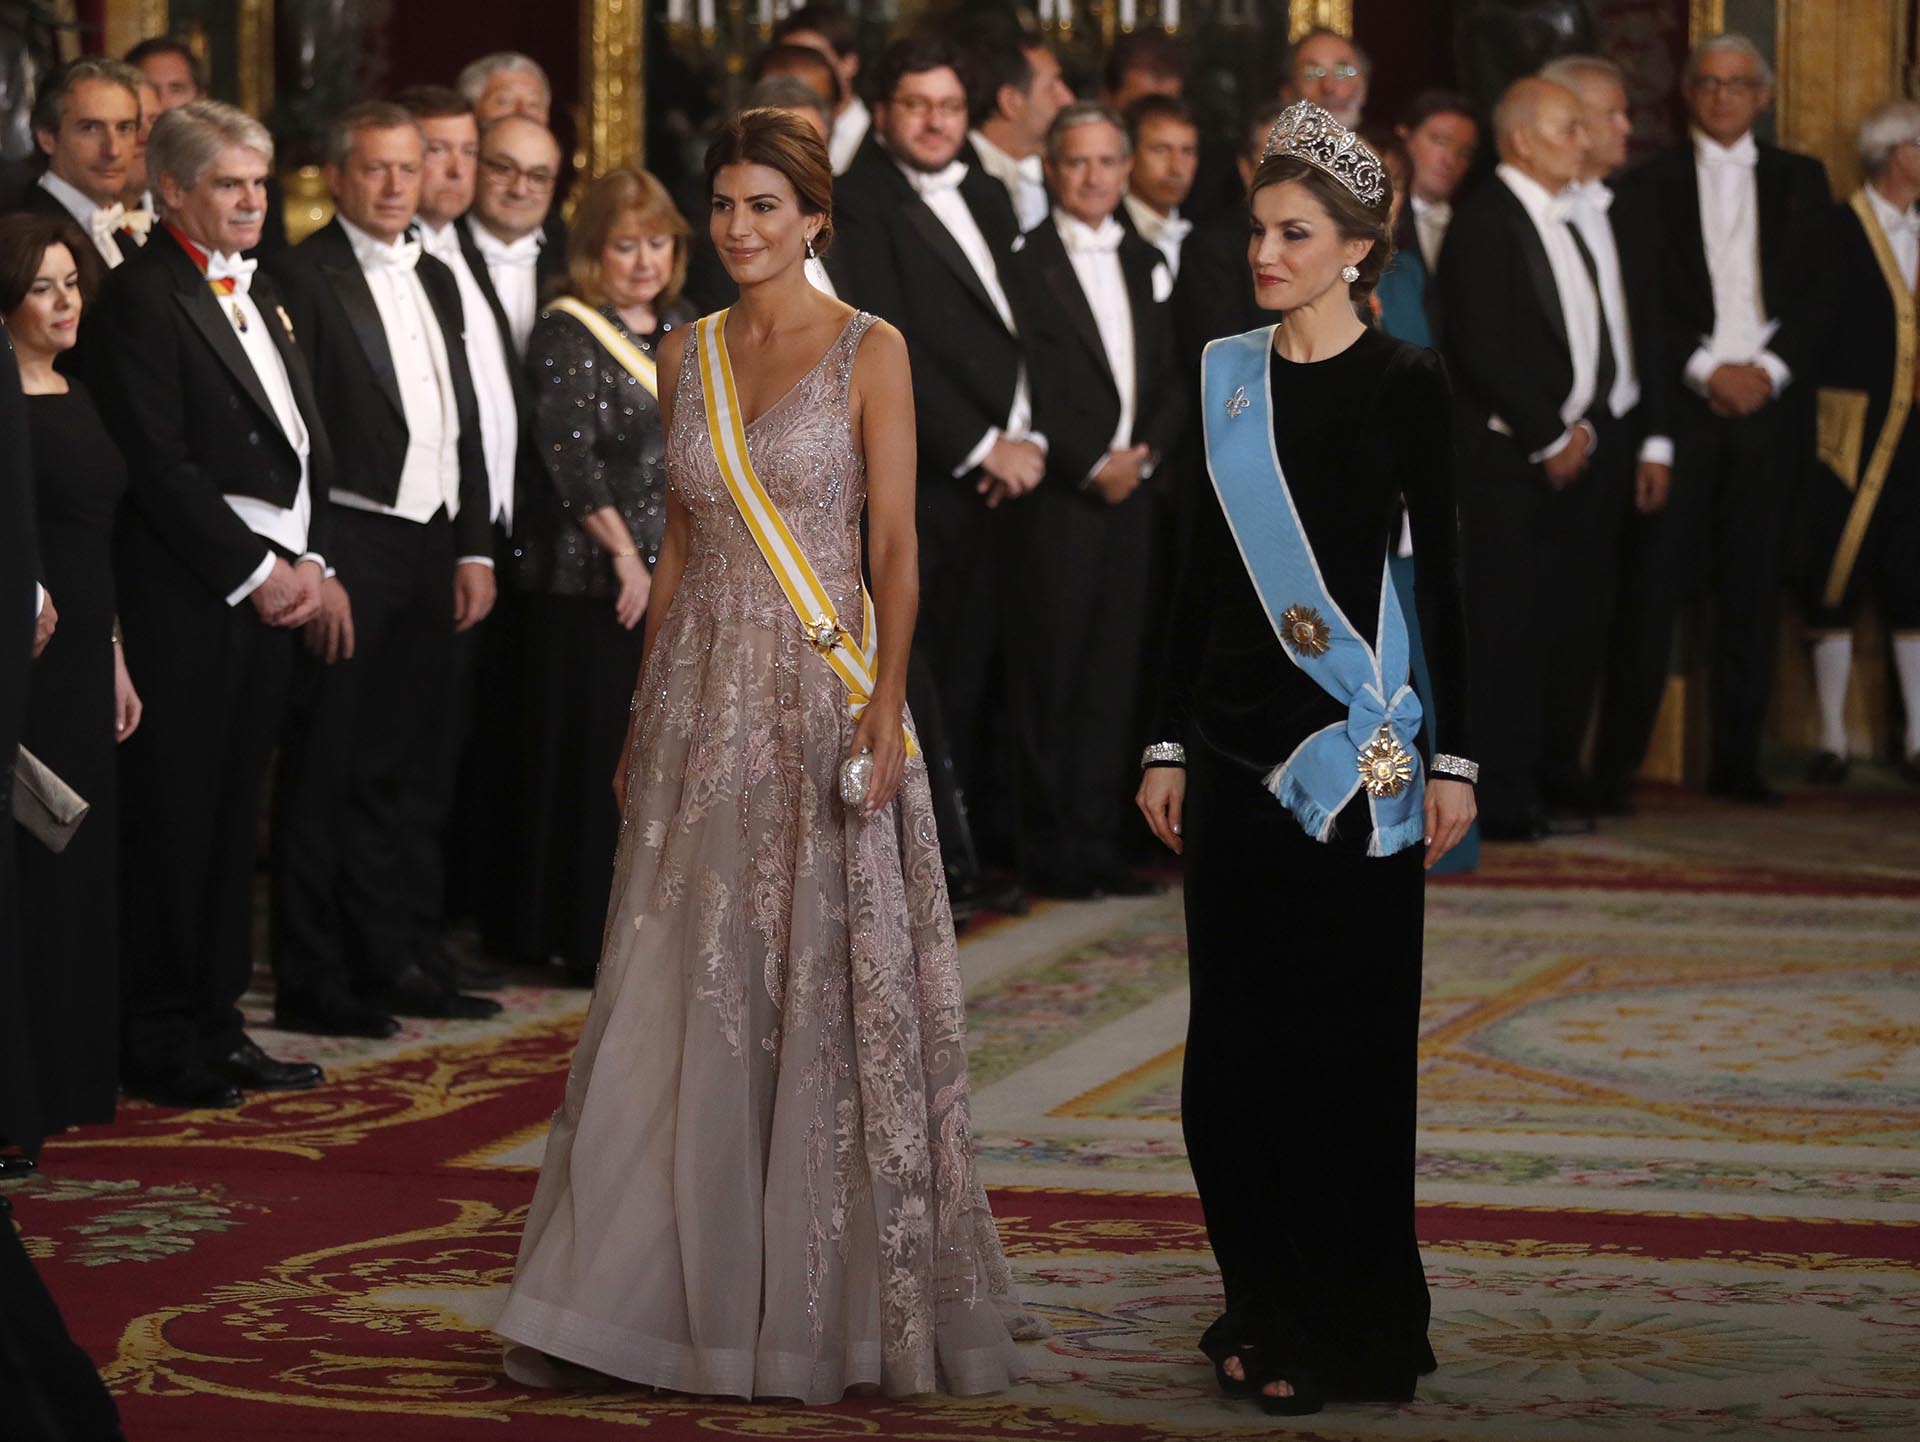 Gabriel Lage can also boast of having dressed other first ladies, such as Argentina's Juliana Awada, and celebrities or models, such as Valeria Mazza (EFE)